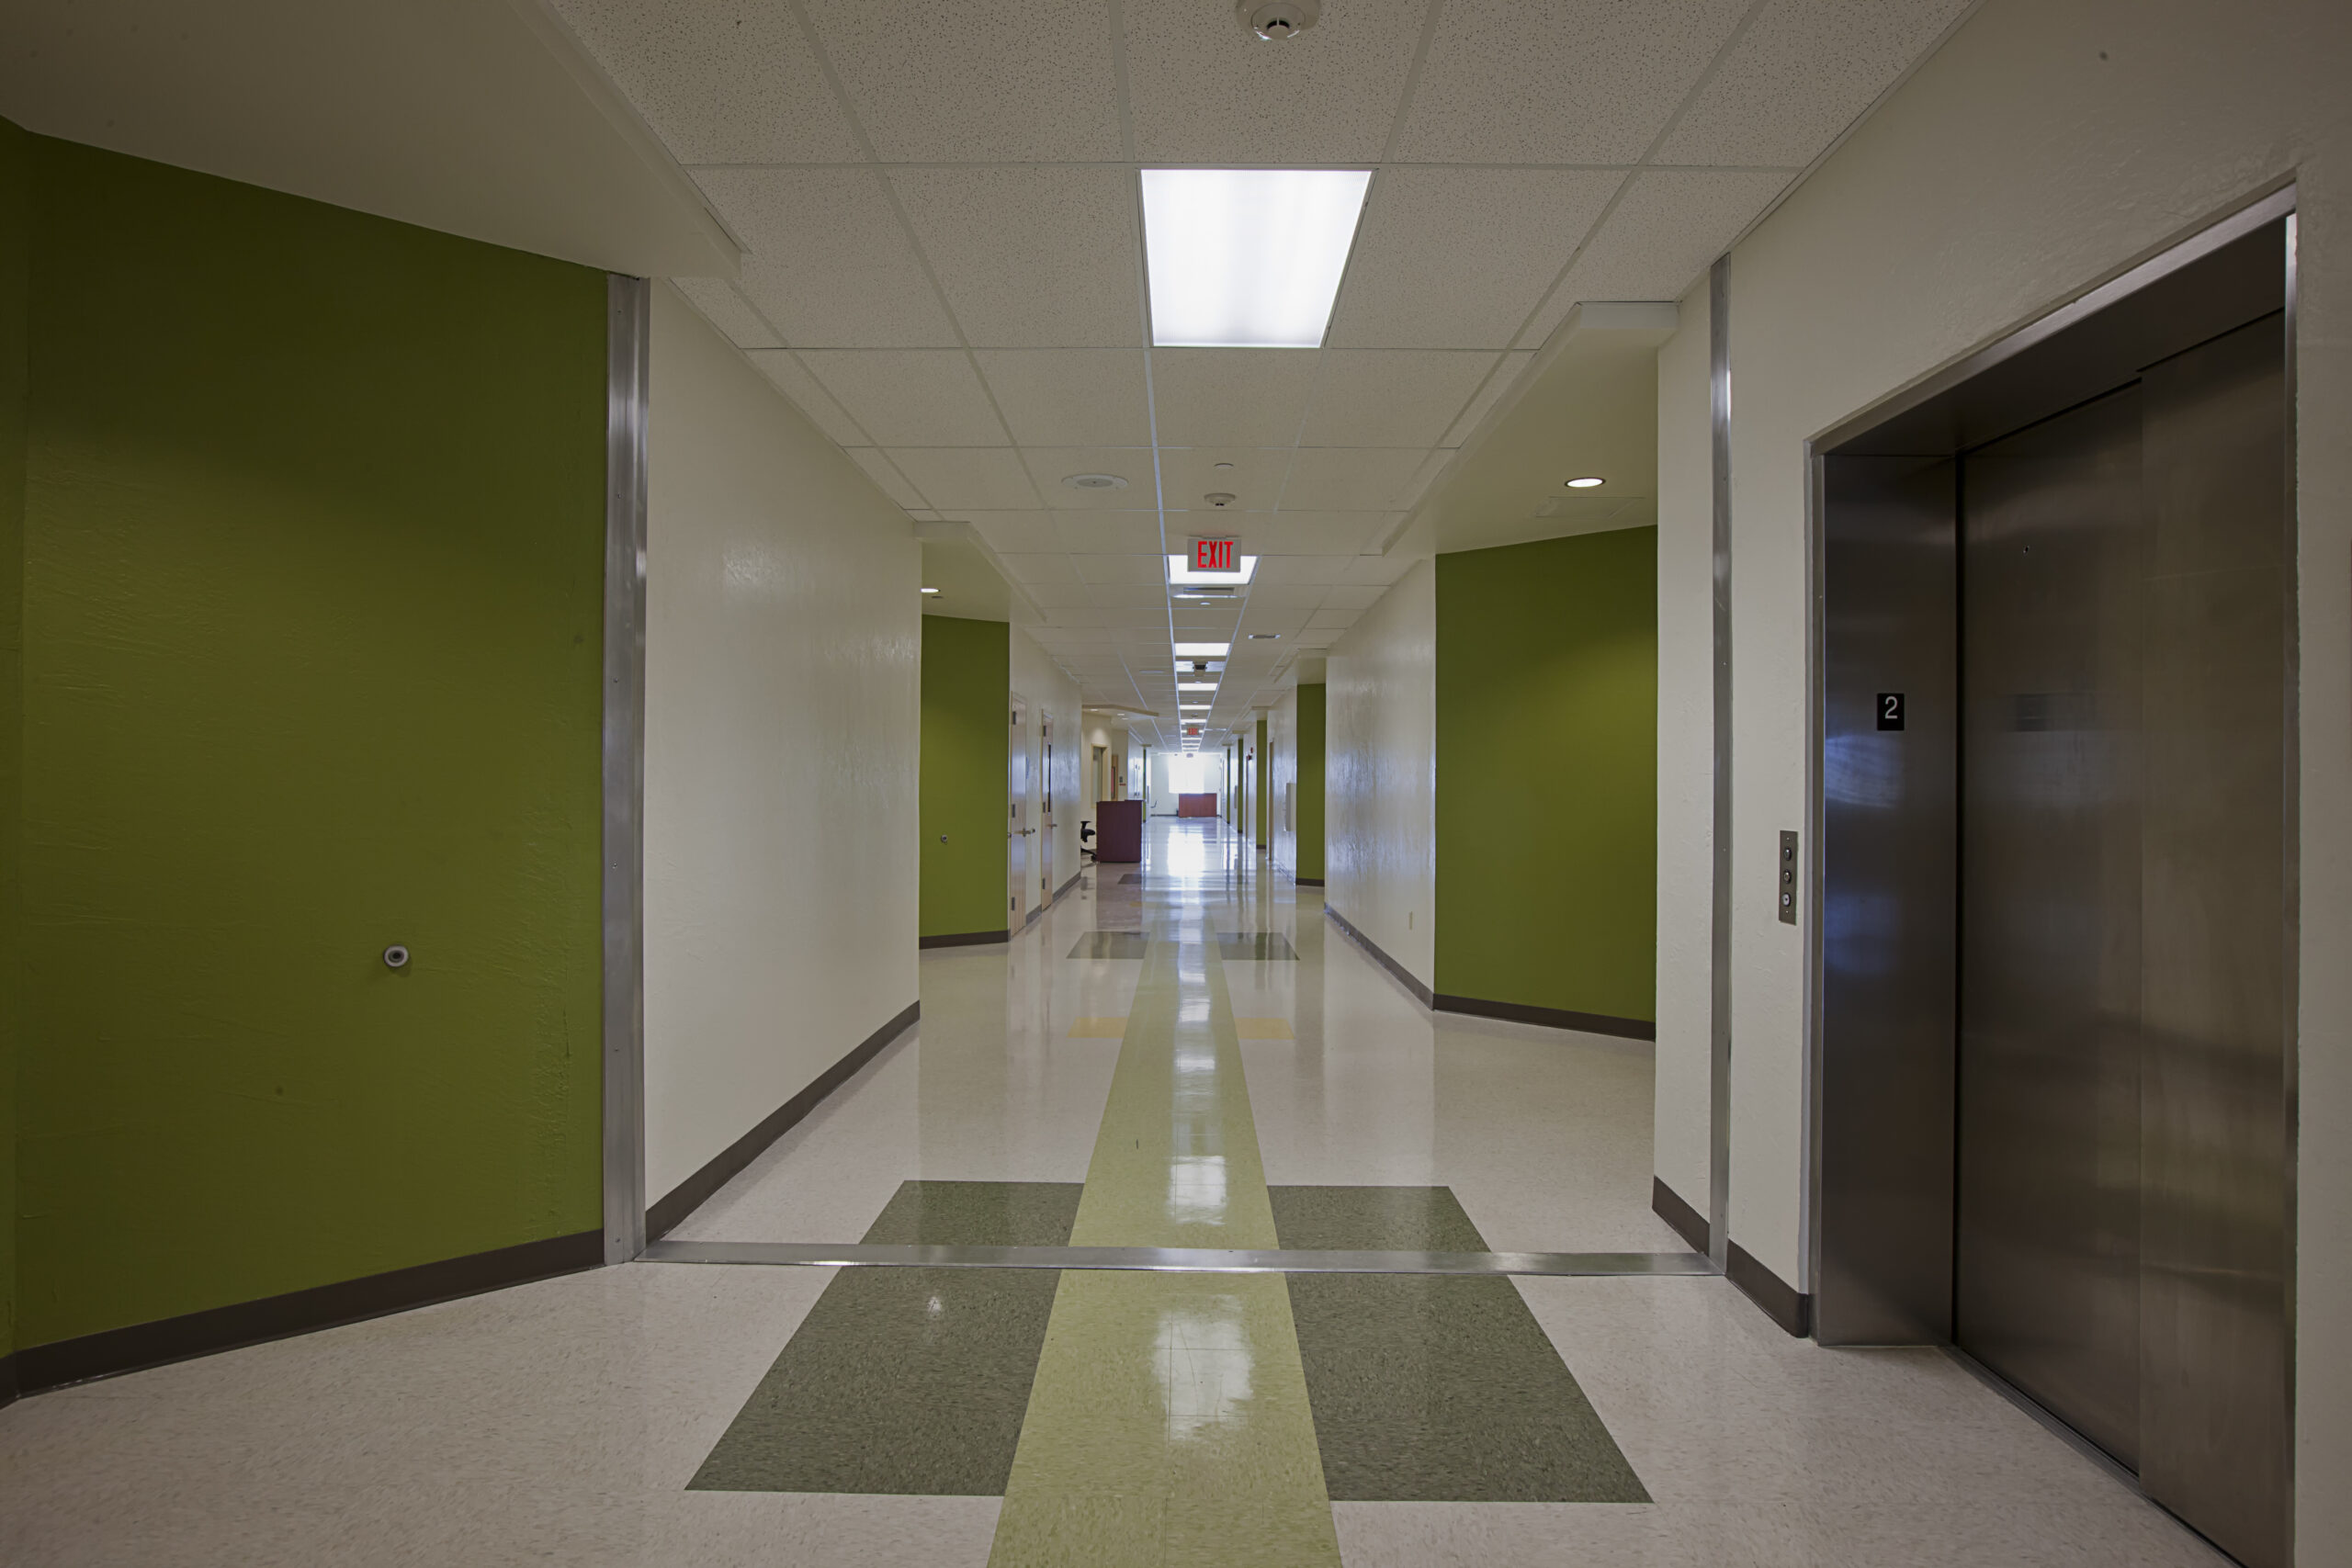 View of a green interior hallway and elevator of the Lanier-James Education Center